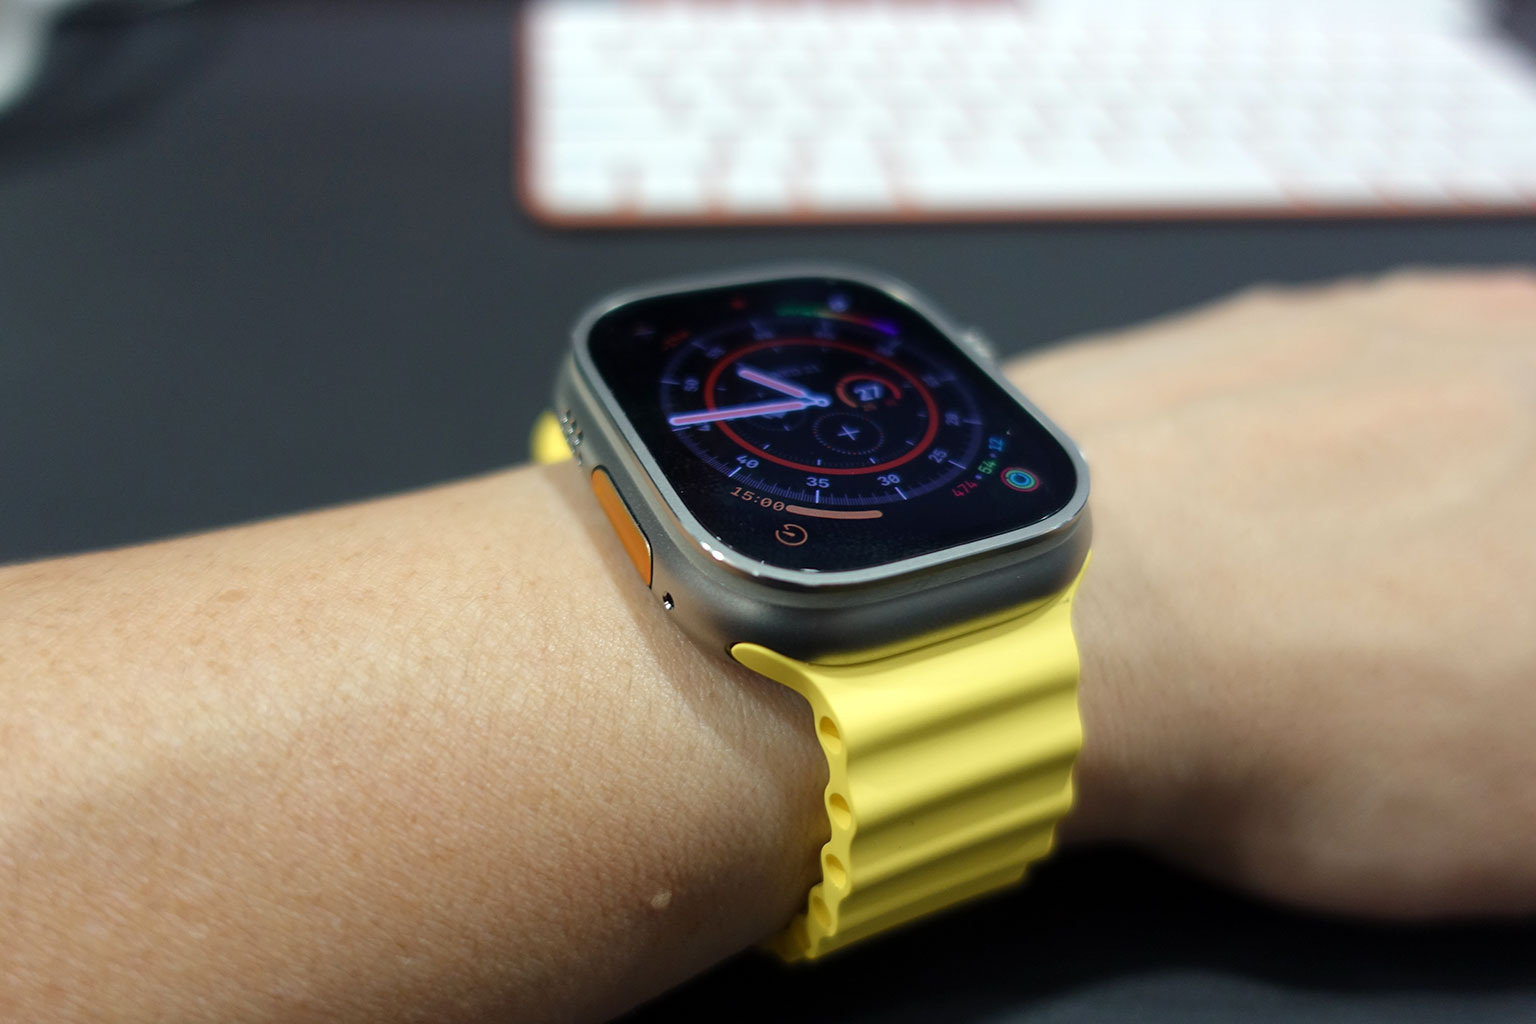 Apple has three straps made just for the Ultra - the Alpine (the orange-coloured strap seen in this article), the Ocean Band (pictured here), and the Trail Loop (which I do not have with me).